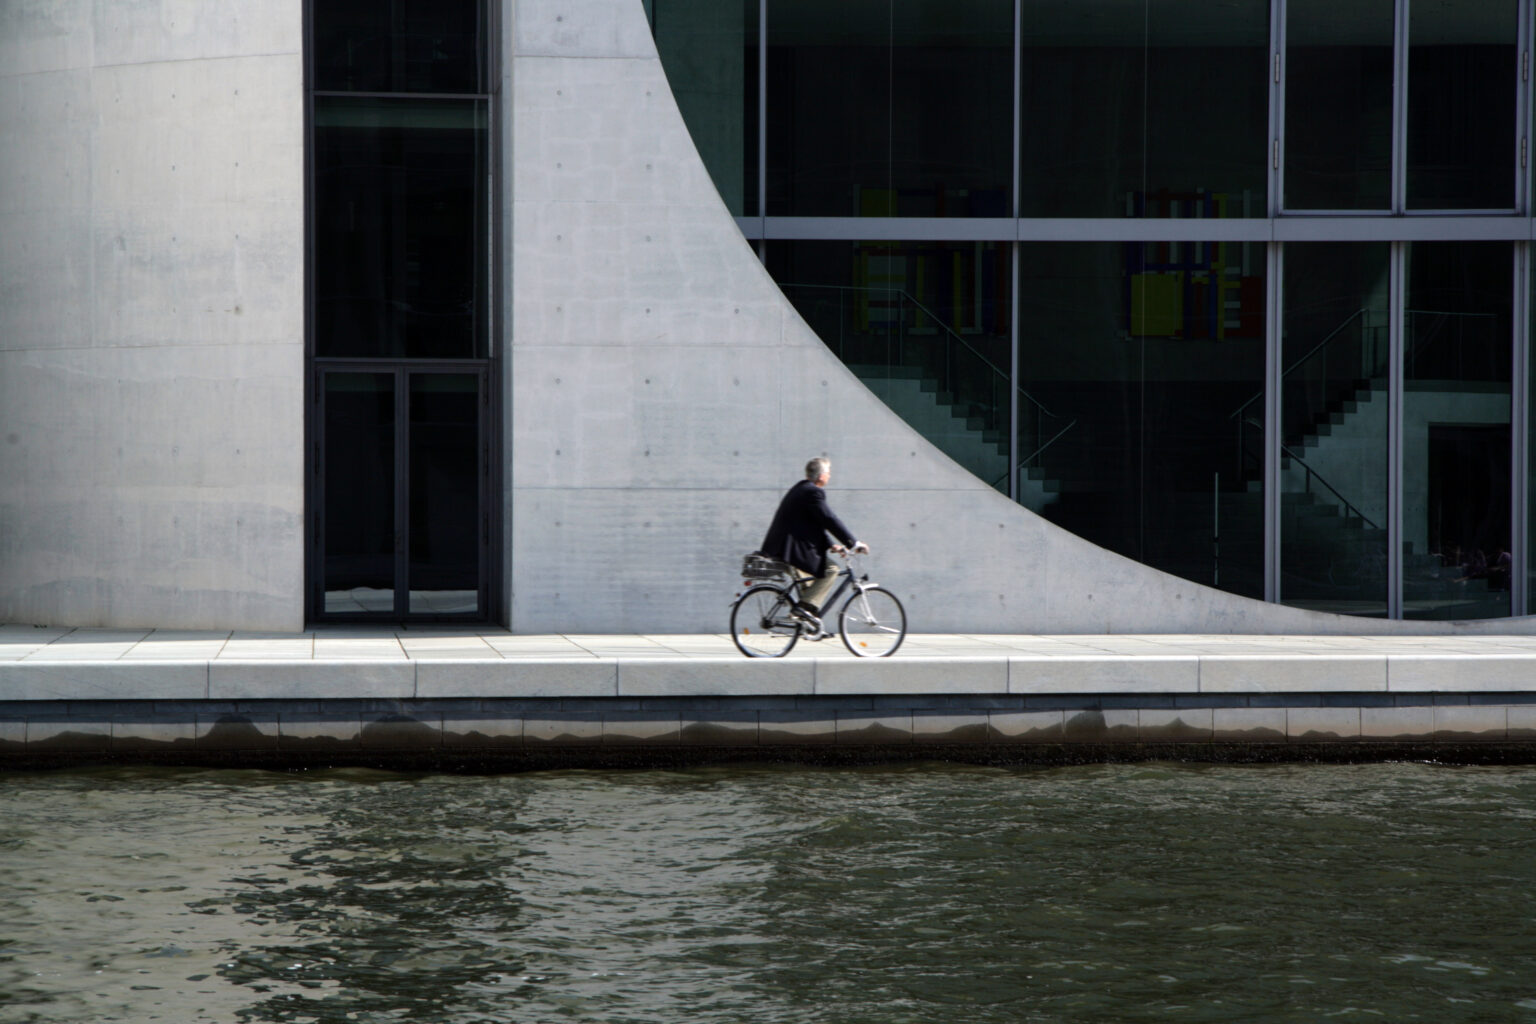 Artistic shot of a businessman on a bicycle with curved architectural wall in the background.